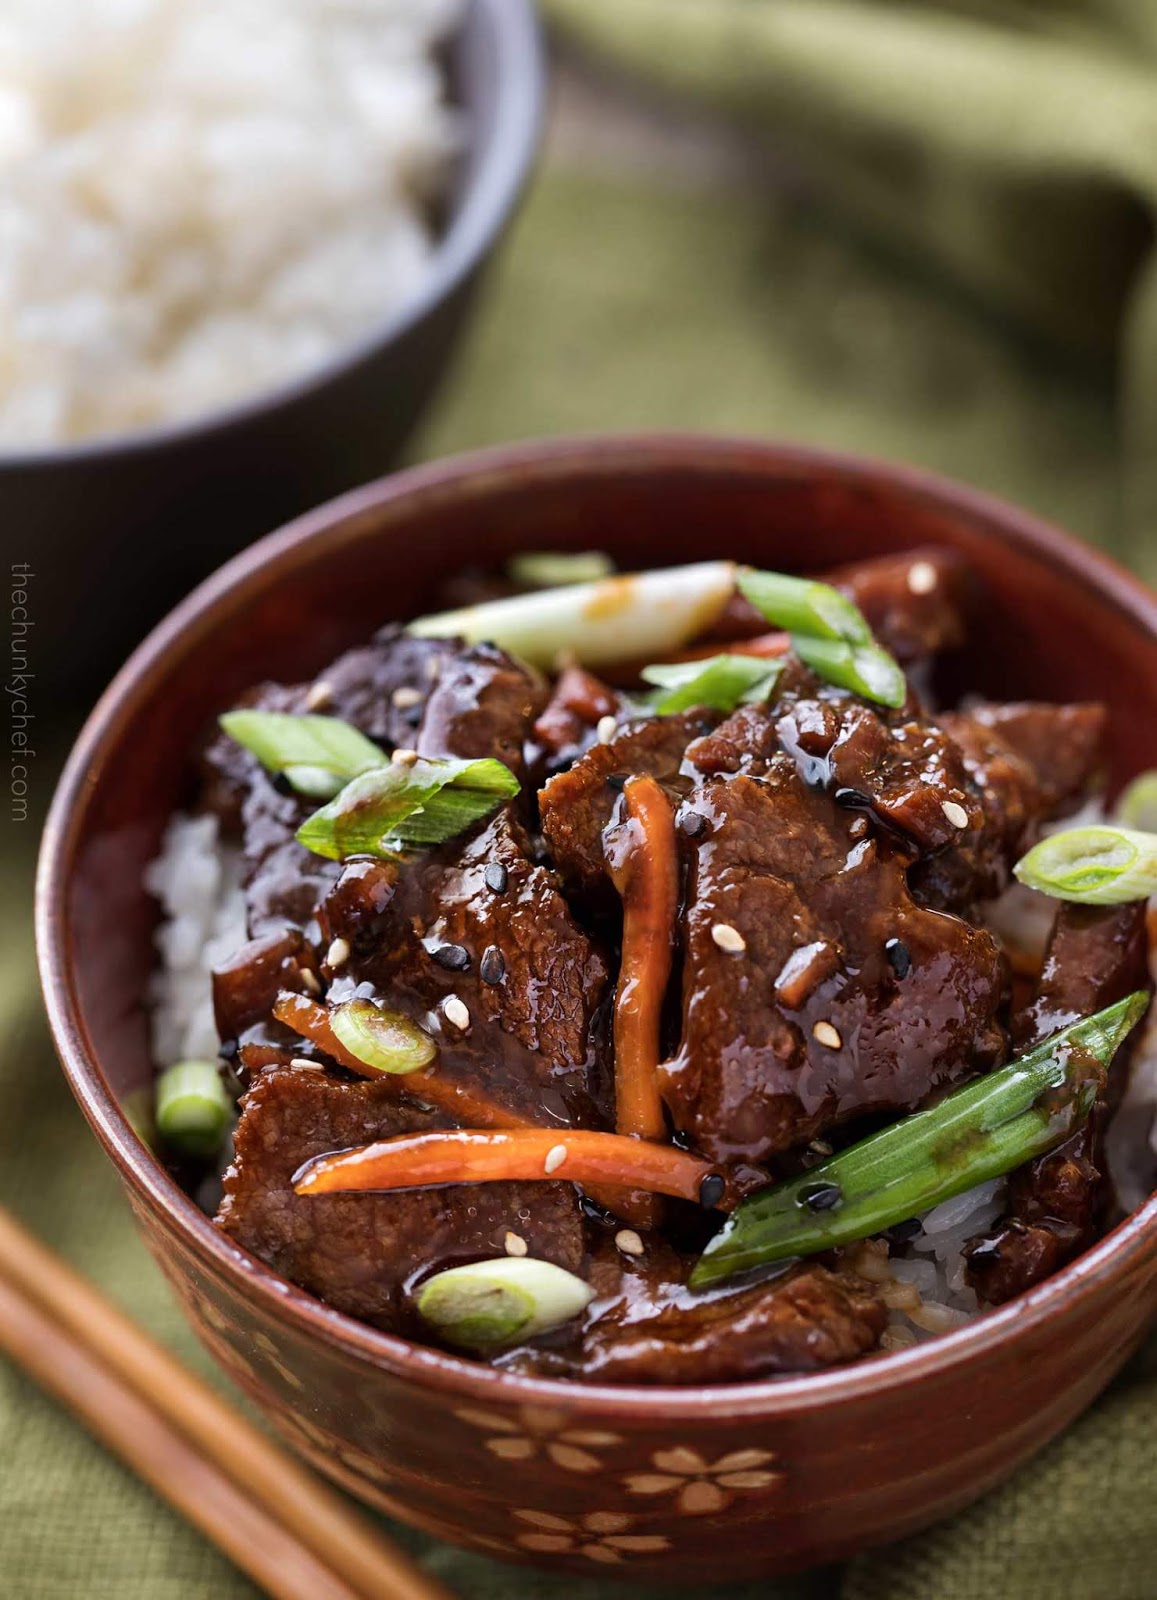 EASY SLOW COOKER MONGOLIAN BEEF RECIPE - FOOD AND DRINK